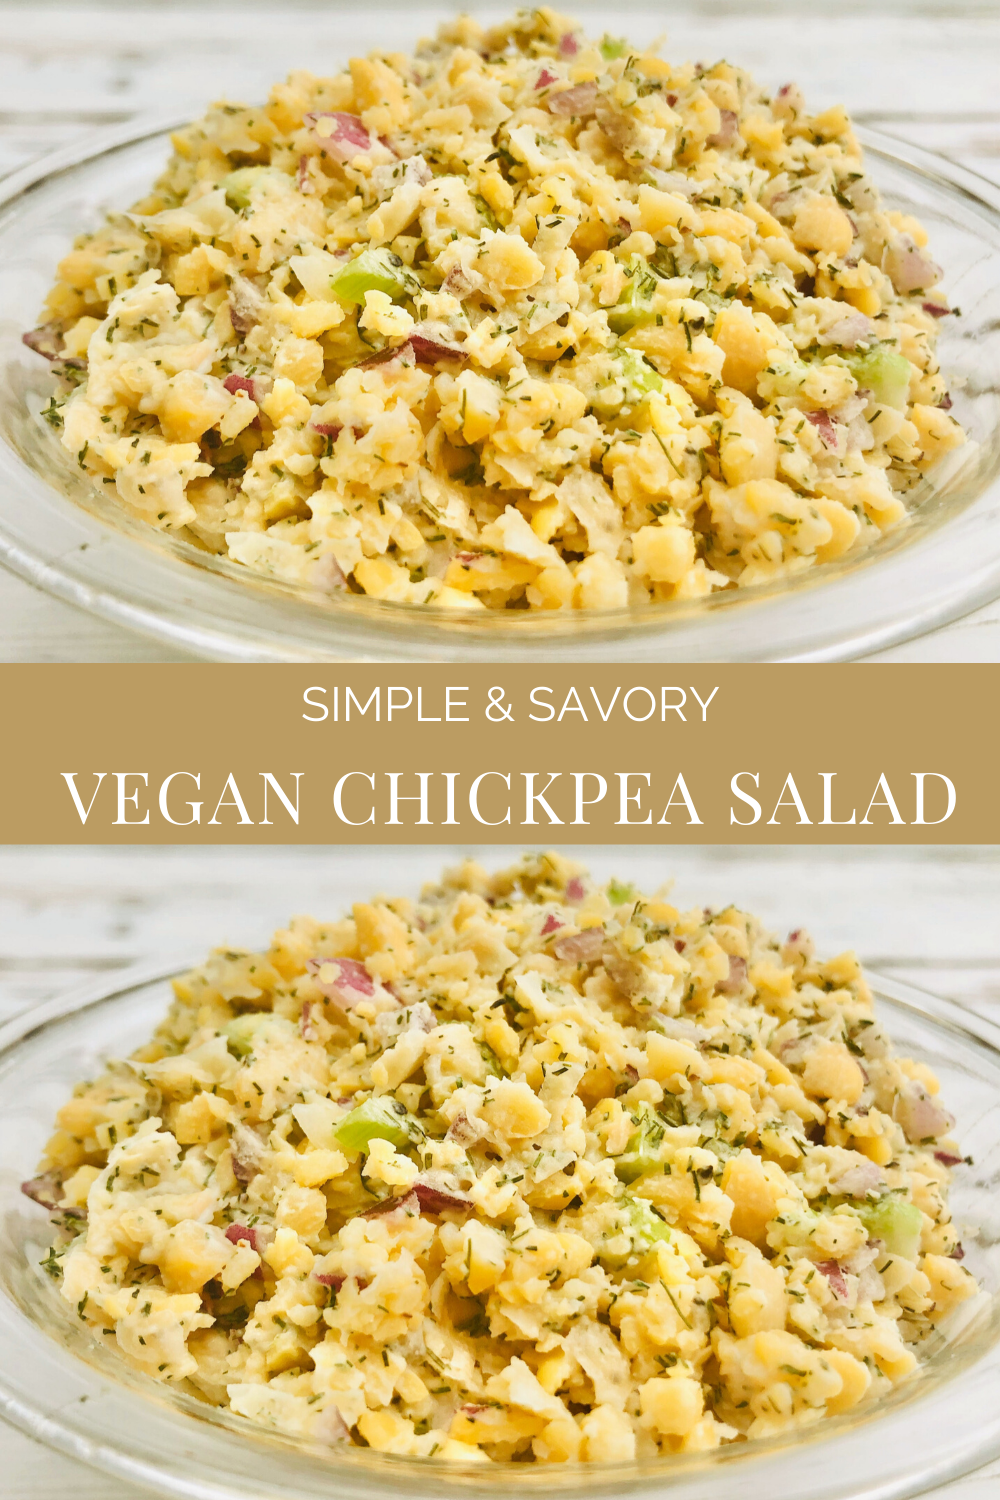 Chickpea Salad for Sandwiches - An easy and delicious high-protein plant-based sandwich filling. Made with chickpeas, celery, onion, lemon juice, and simple spices, this quick, no-fuss salad is ready to serve in minutes! #chickpeasaladforsandwiches #veganchickpeasalad #easyveganlunchrecipes #veganlunch #veganmealprep #plantbased #thiswifecooksrecipes #garbanzobeansalad #chickpeasalad #veganquarantinecooking #veganquarantinerecipes via @thiswifecooks